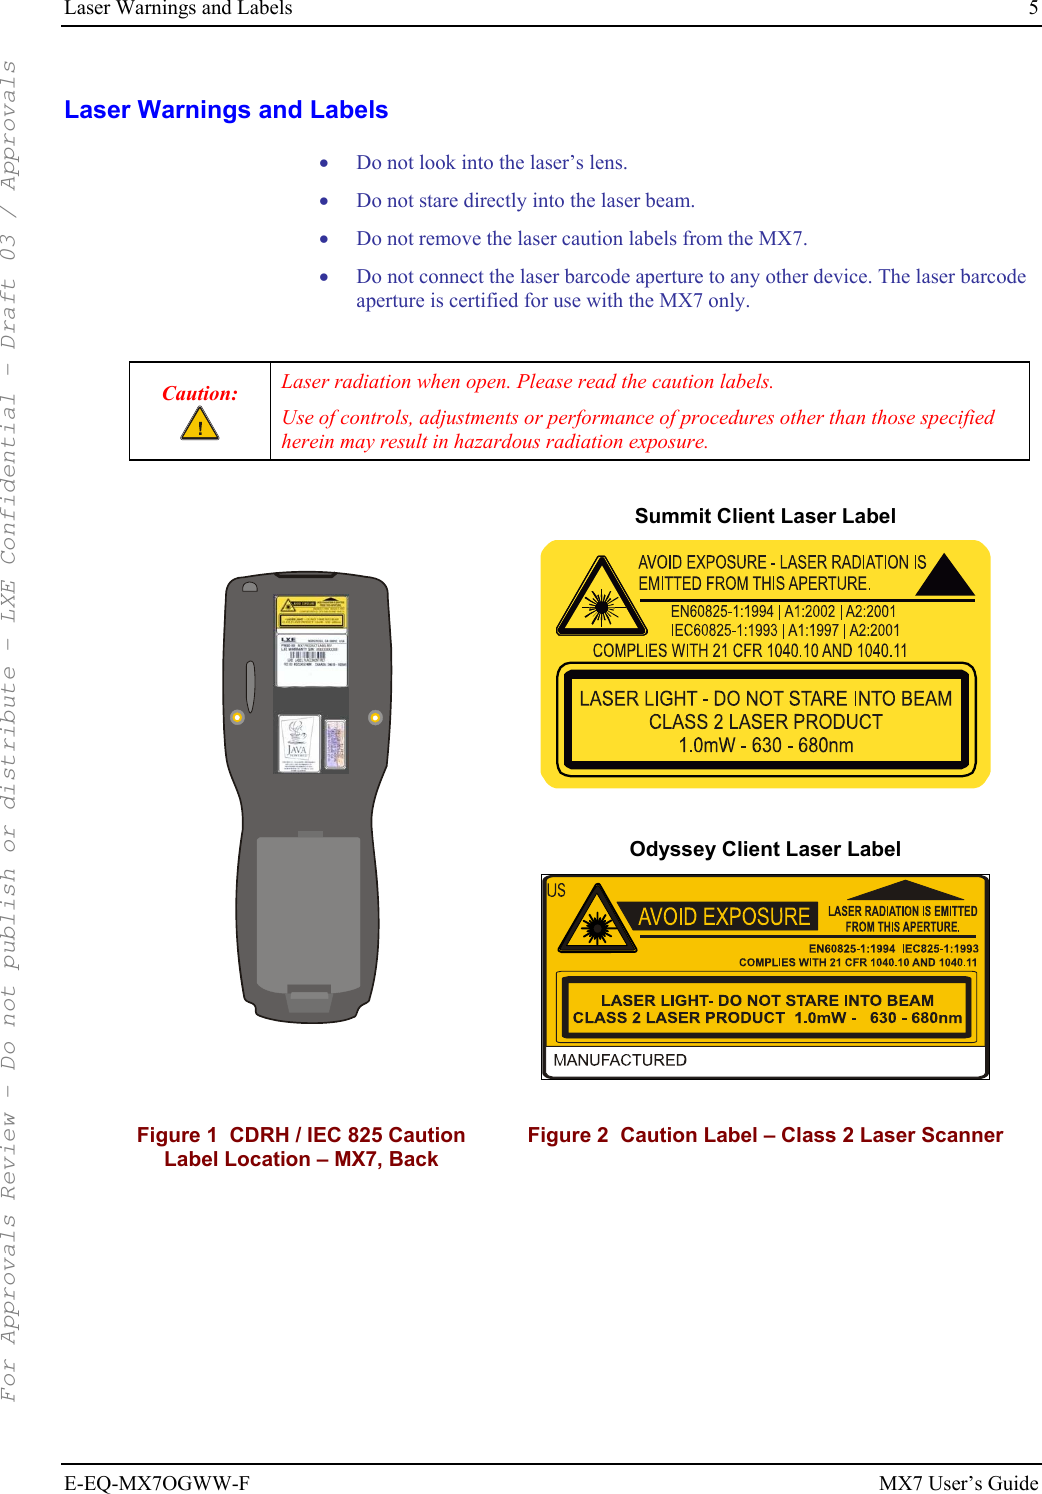 Laser Warnings and Labels  5 E-EQ-MX7OGWW-F MX7 User’s Guide Laser Warnings and Labels • Do not look into the laser’s lens. • Do not stare directly into the laser beam.  • Do not remove the laser caution labels from the MX7.  • Do not connect the laser barcode aperture to any other device. The laser barcode aperture is certified for use with the MX7 only.  Caution:  Laser radiation when open. Please read the caution labels. Use of controls, adjustments or performance of procedures other than those specified herein may result in hazardous radiation exposure.        Summit Client Laser Label   Odyssey Client Laser Label   Figure 1  CDRH / IEC 825 Caution Label Location – MX7, Back Figure 2  Caution Label – Class 2 Laser Scanner  For Approvals Review - Do not publish or distribute - LXE Confidential - Draft 03 / Approvals